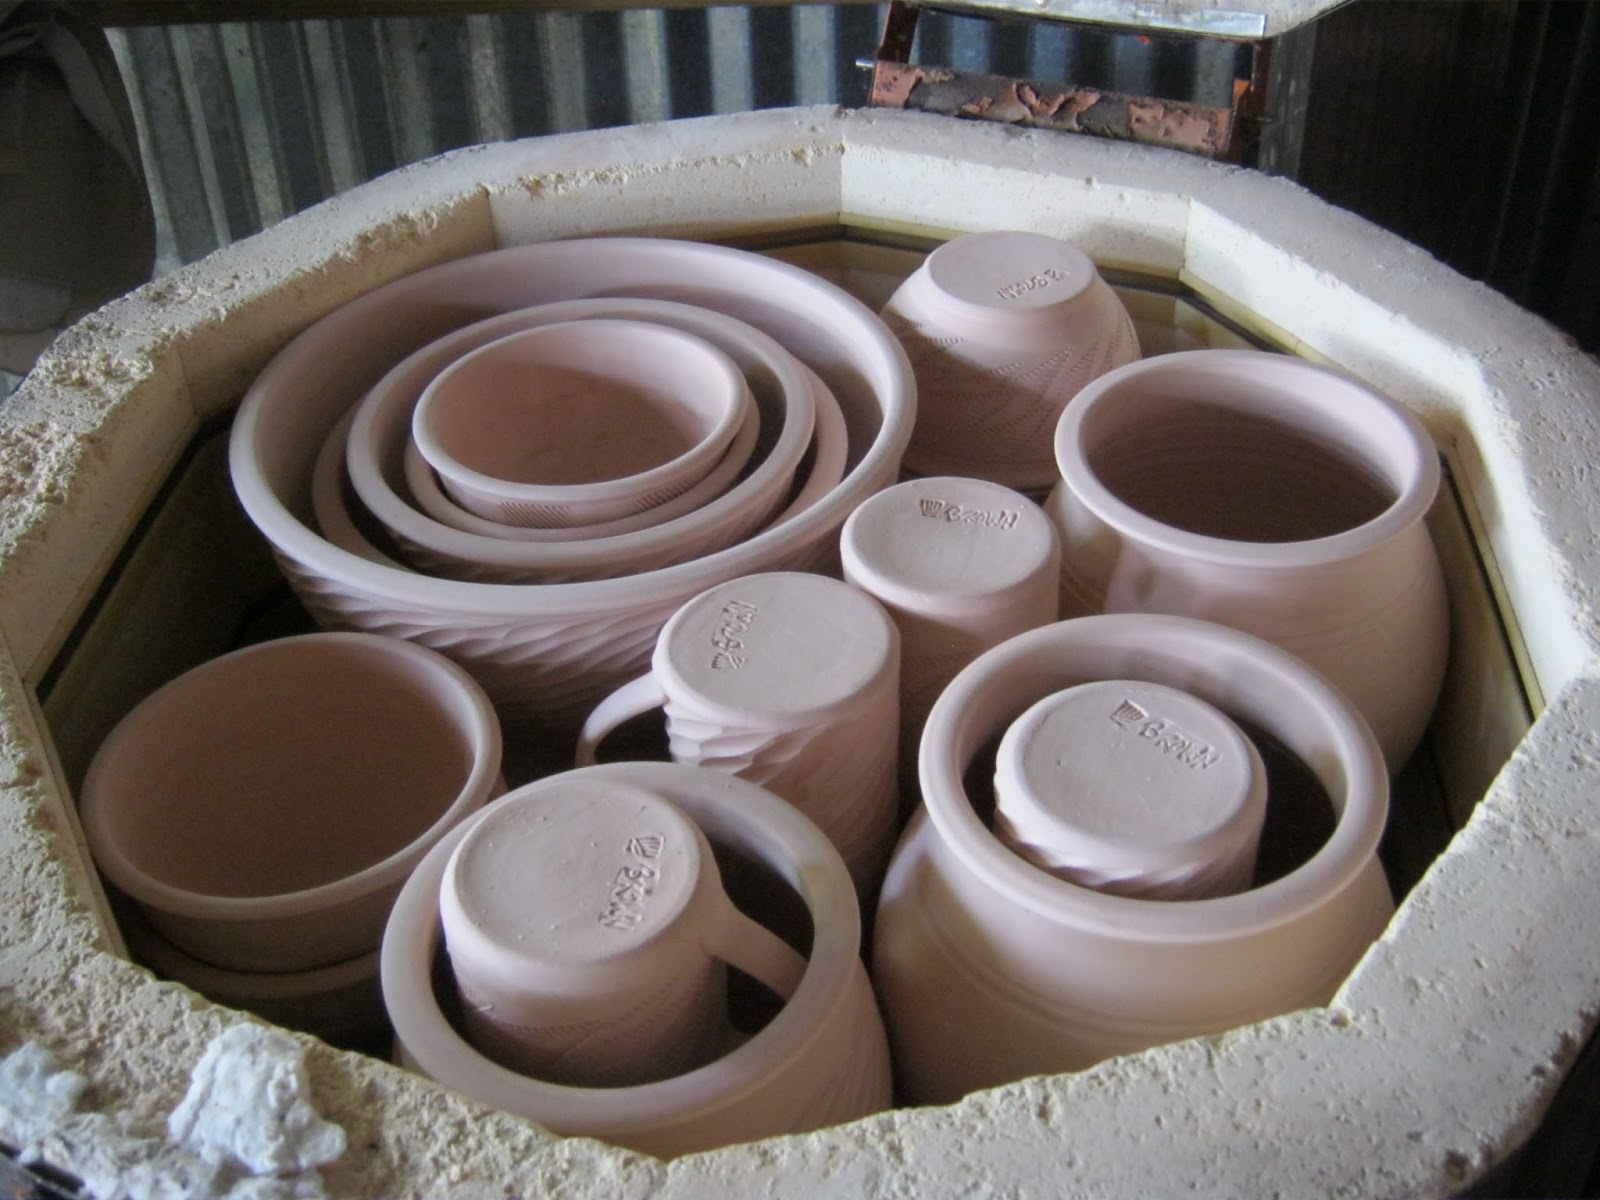 meesh's pottery: Which would you prefer; loading a bisque kiln or a